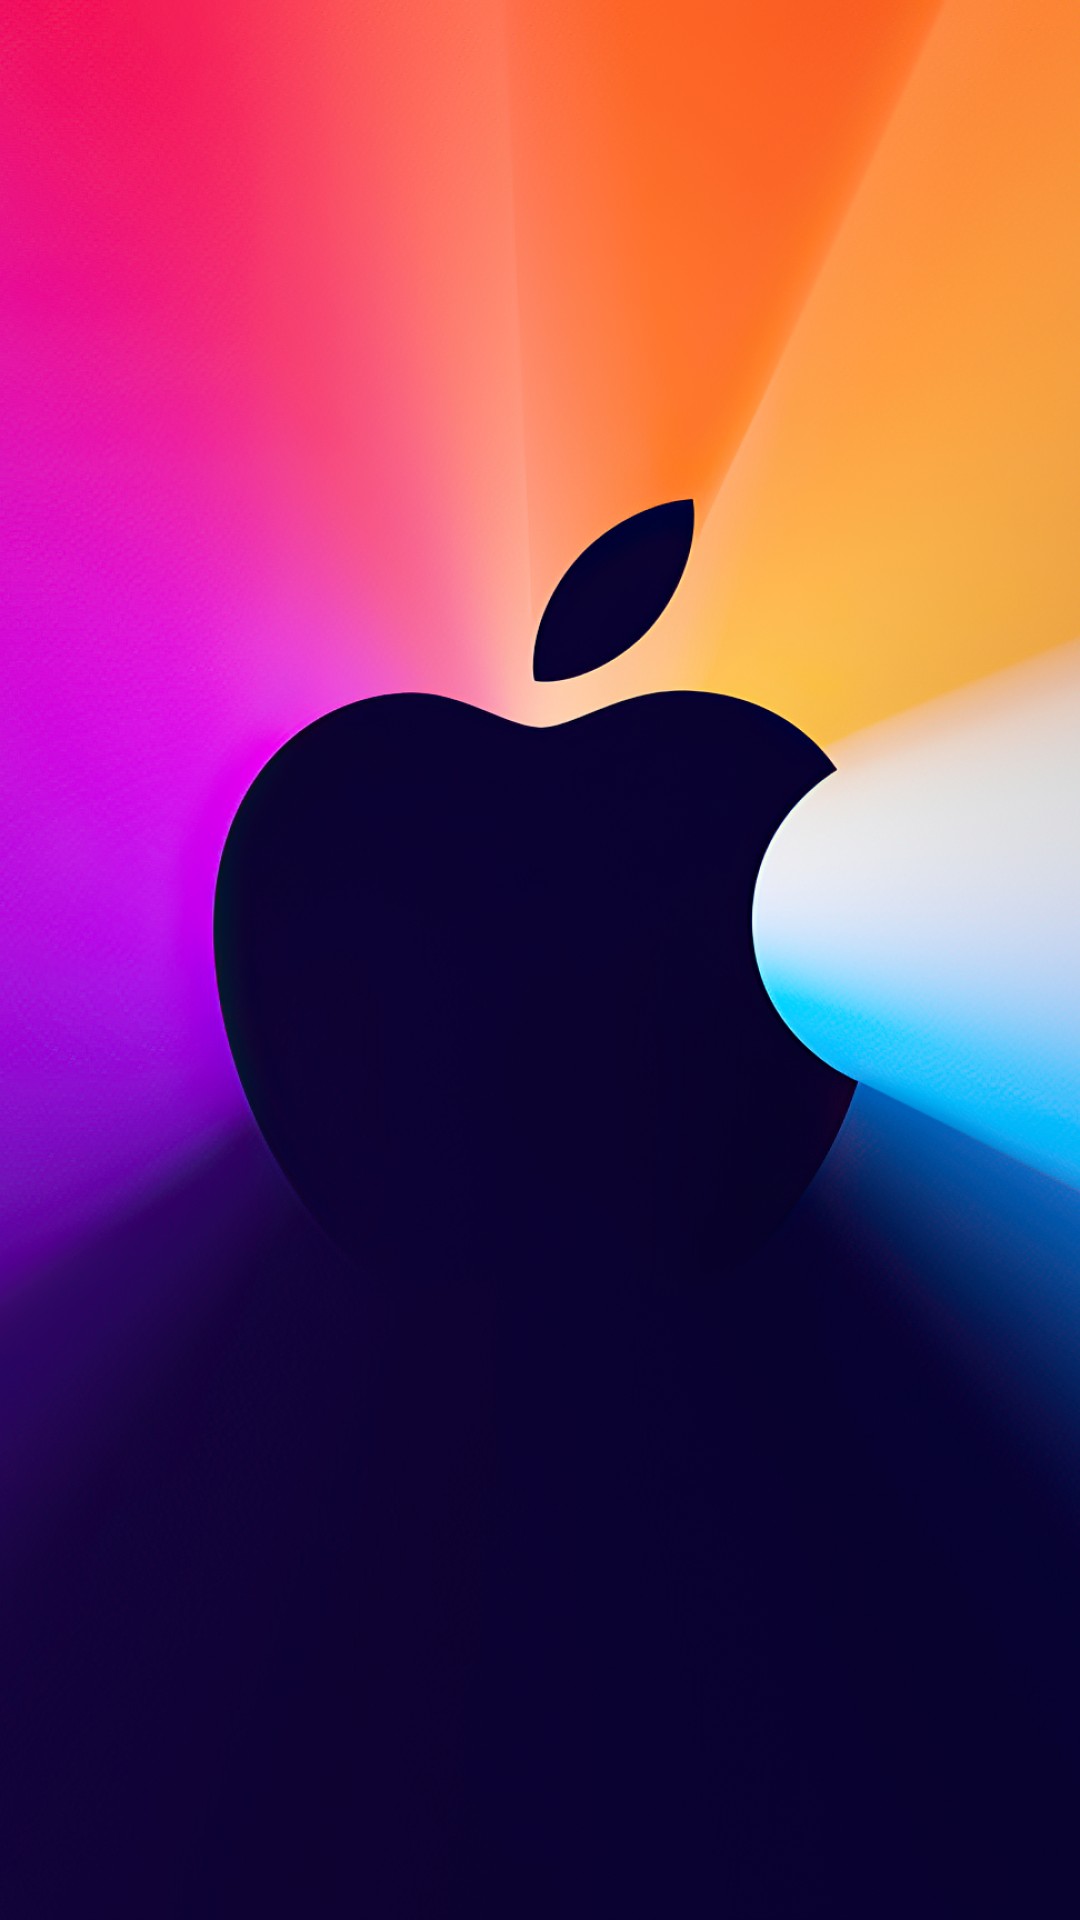 Download Apple Unleashed event wallpapers